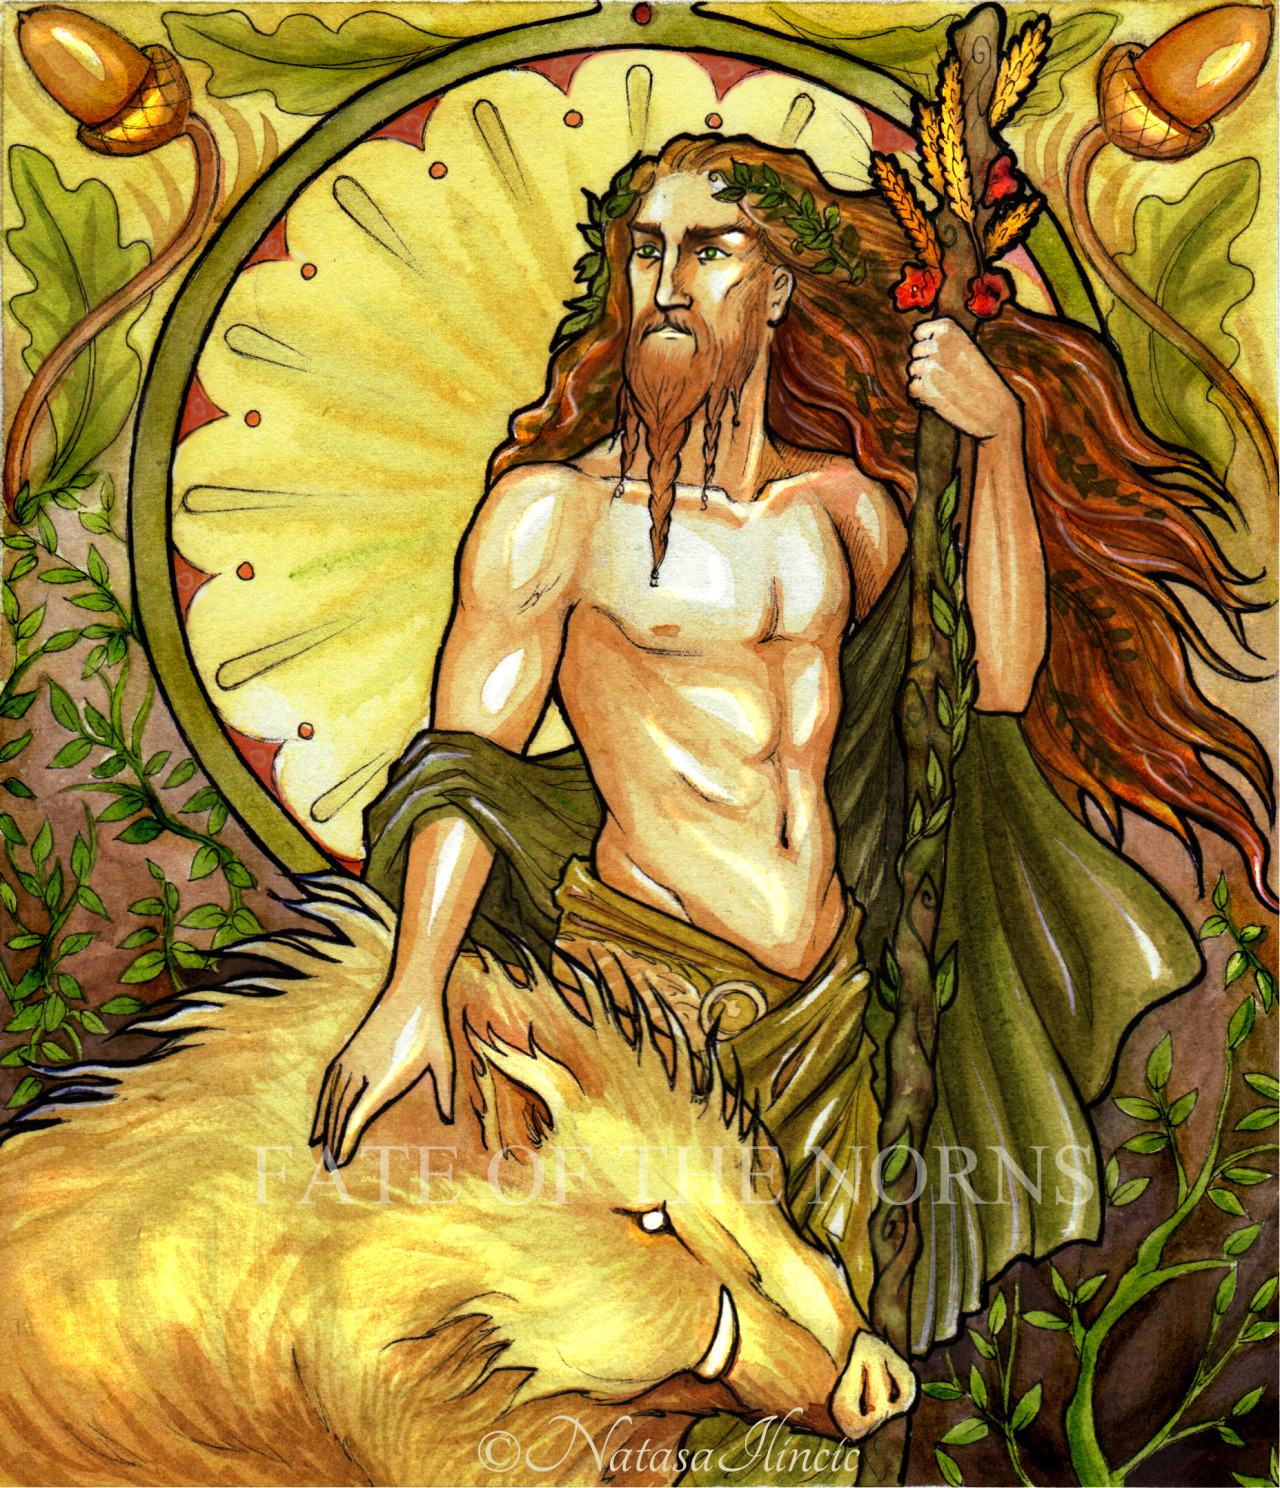 Freyr (or Frey) is one of the most important Vanir